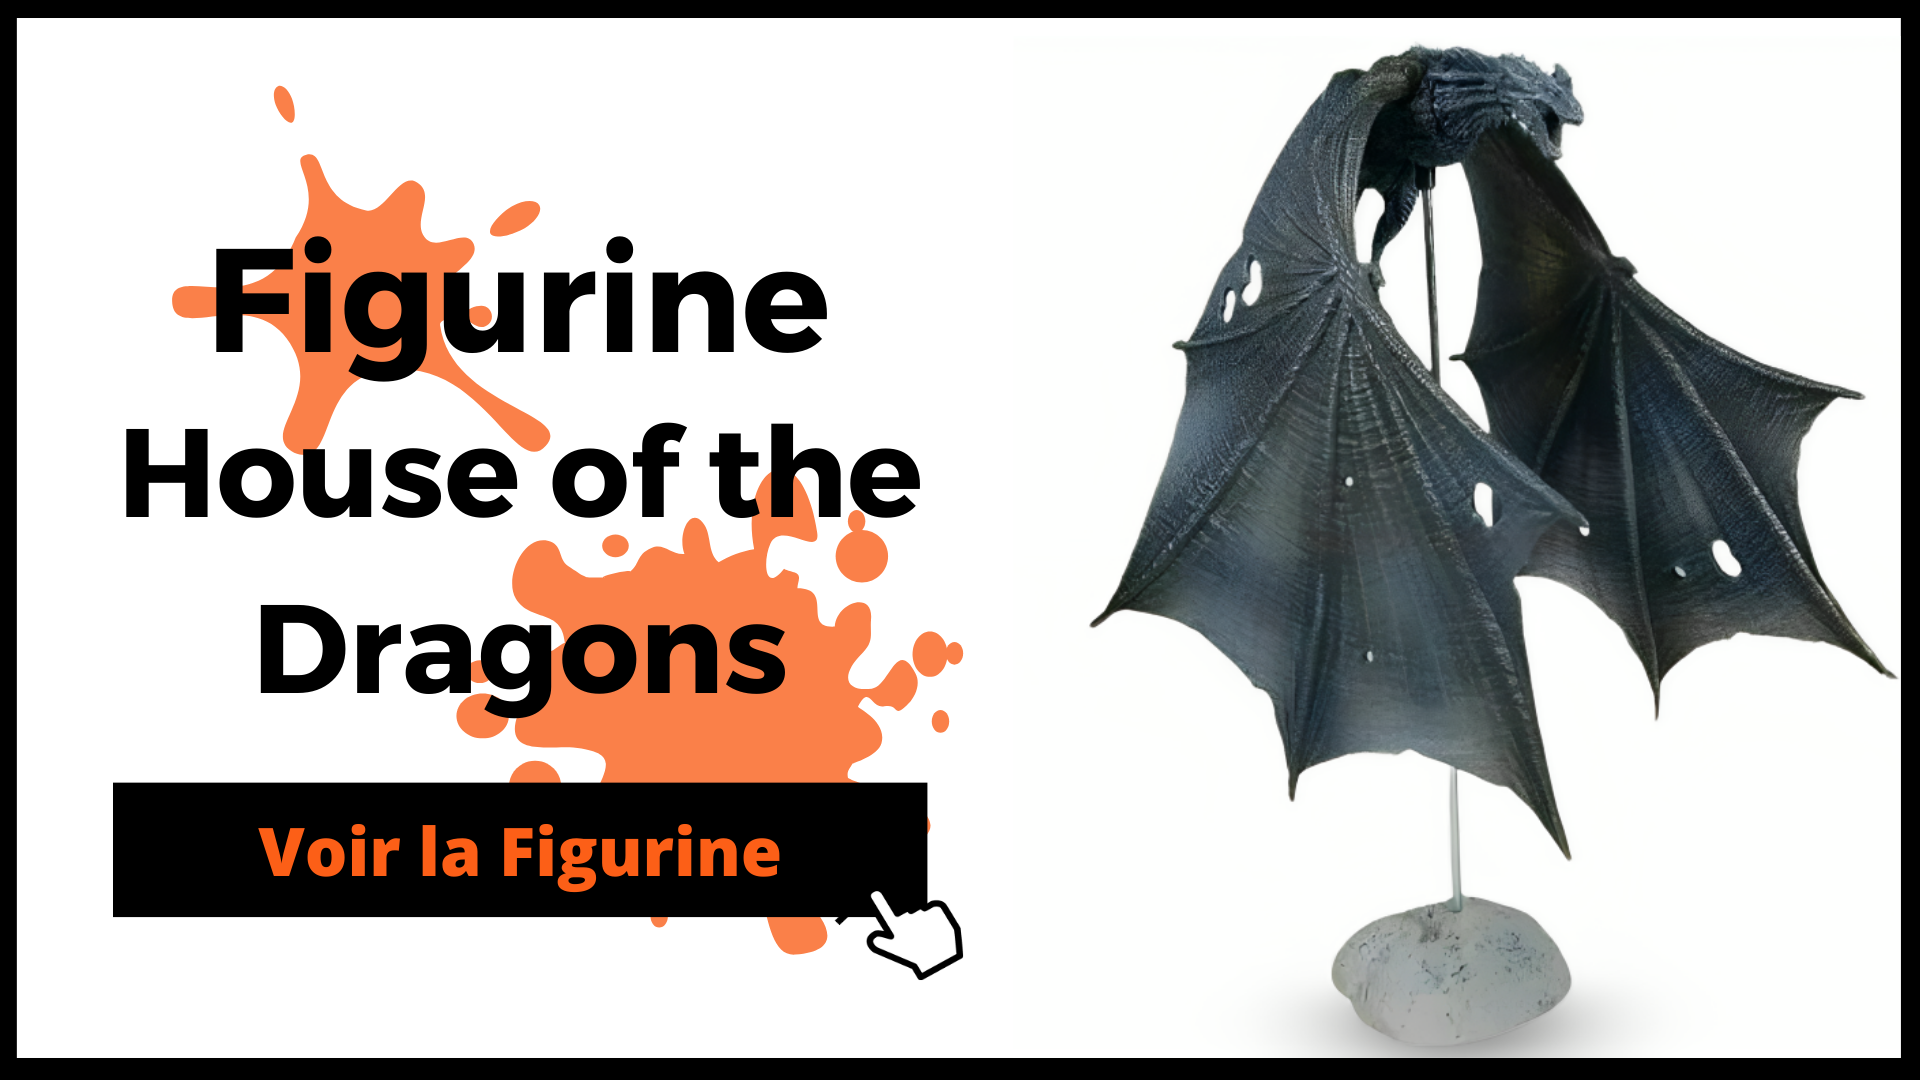 Figurine House of the Dragons